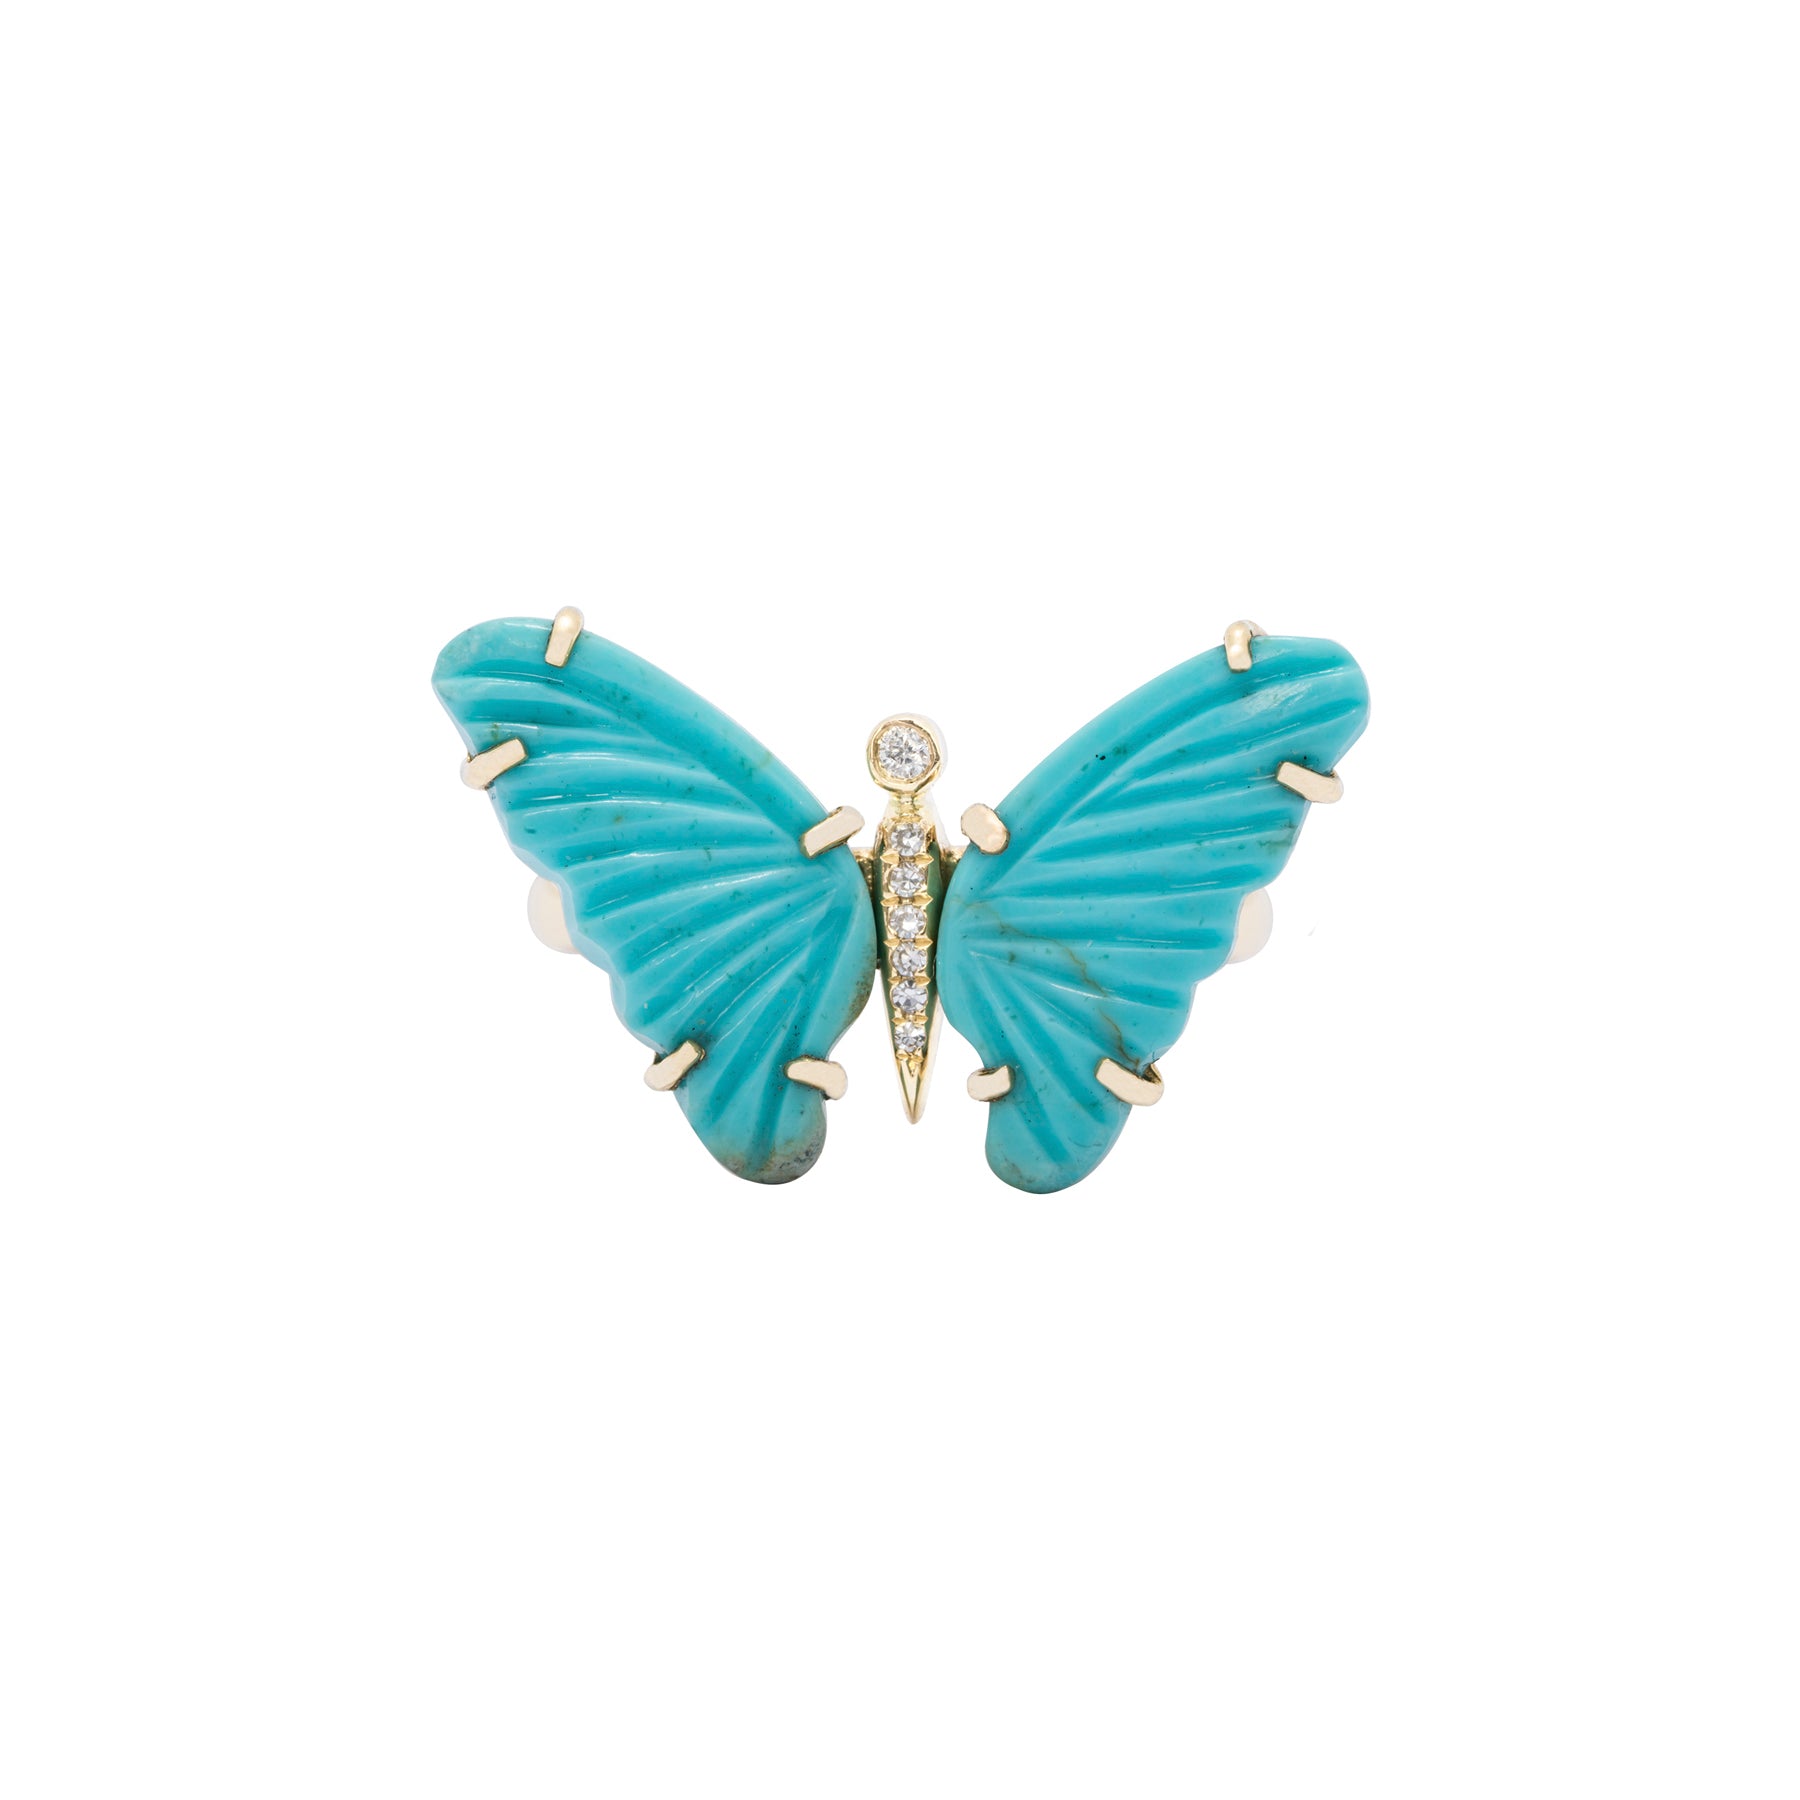 Turquoise Butterfly Ring - Nina Segal Jewelry